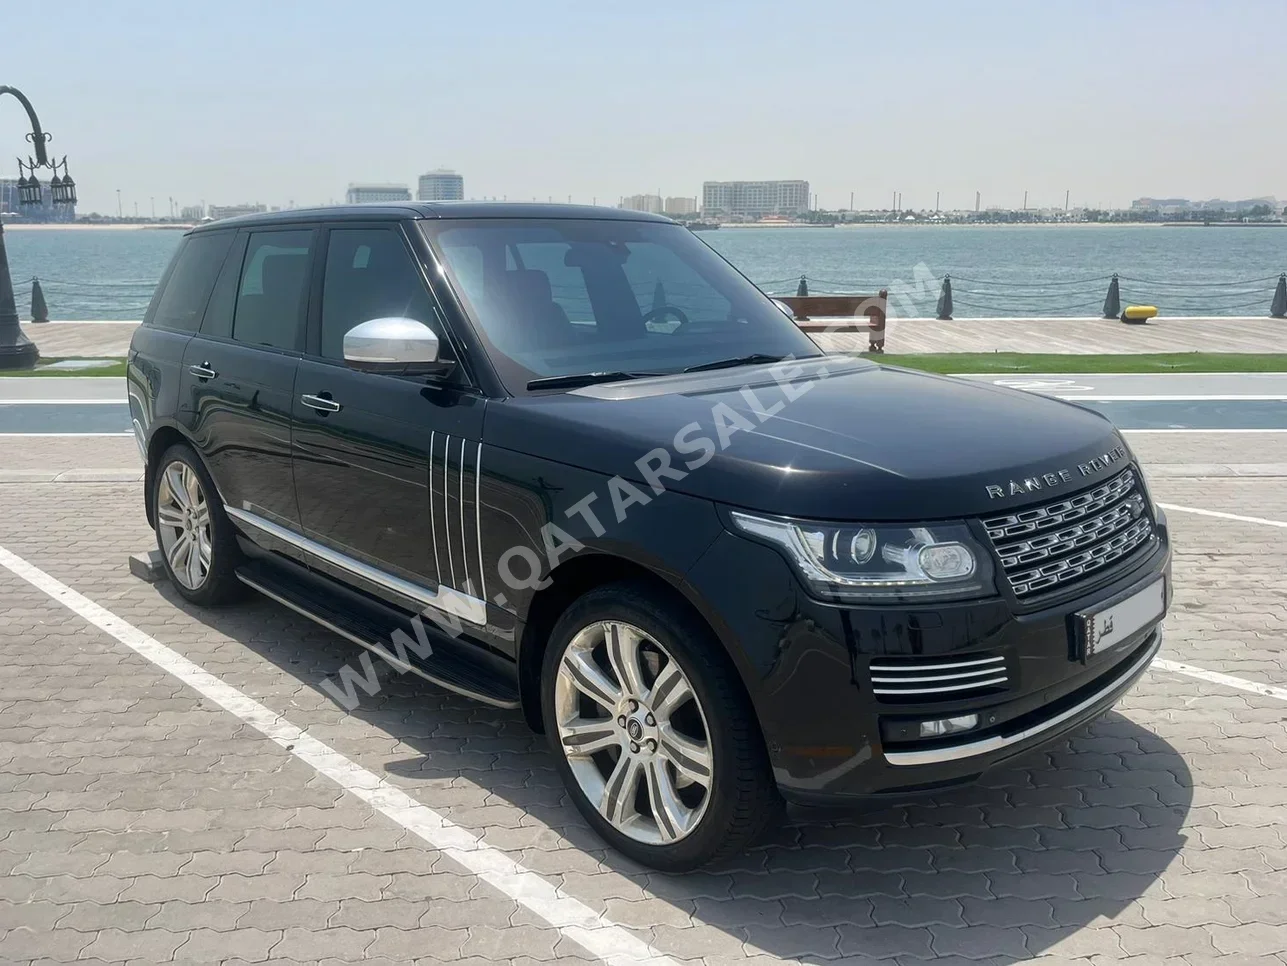 Land Rover  Range Rover  Vogue SE Super charged  2014  Automatic  219,000 Km  8 Cylinder  Four Wheel Drive (4WD)  SUV  Black